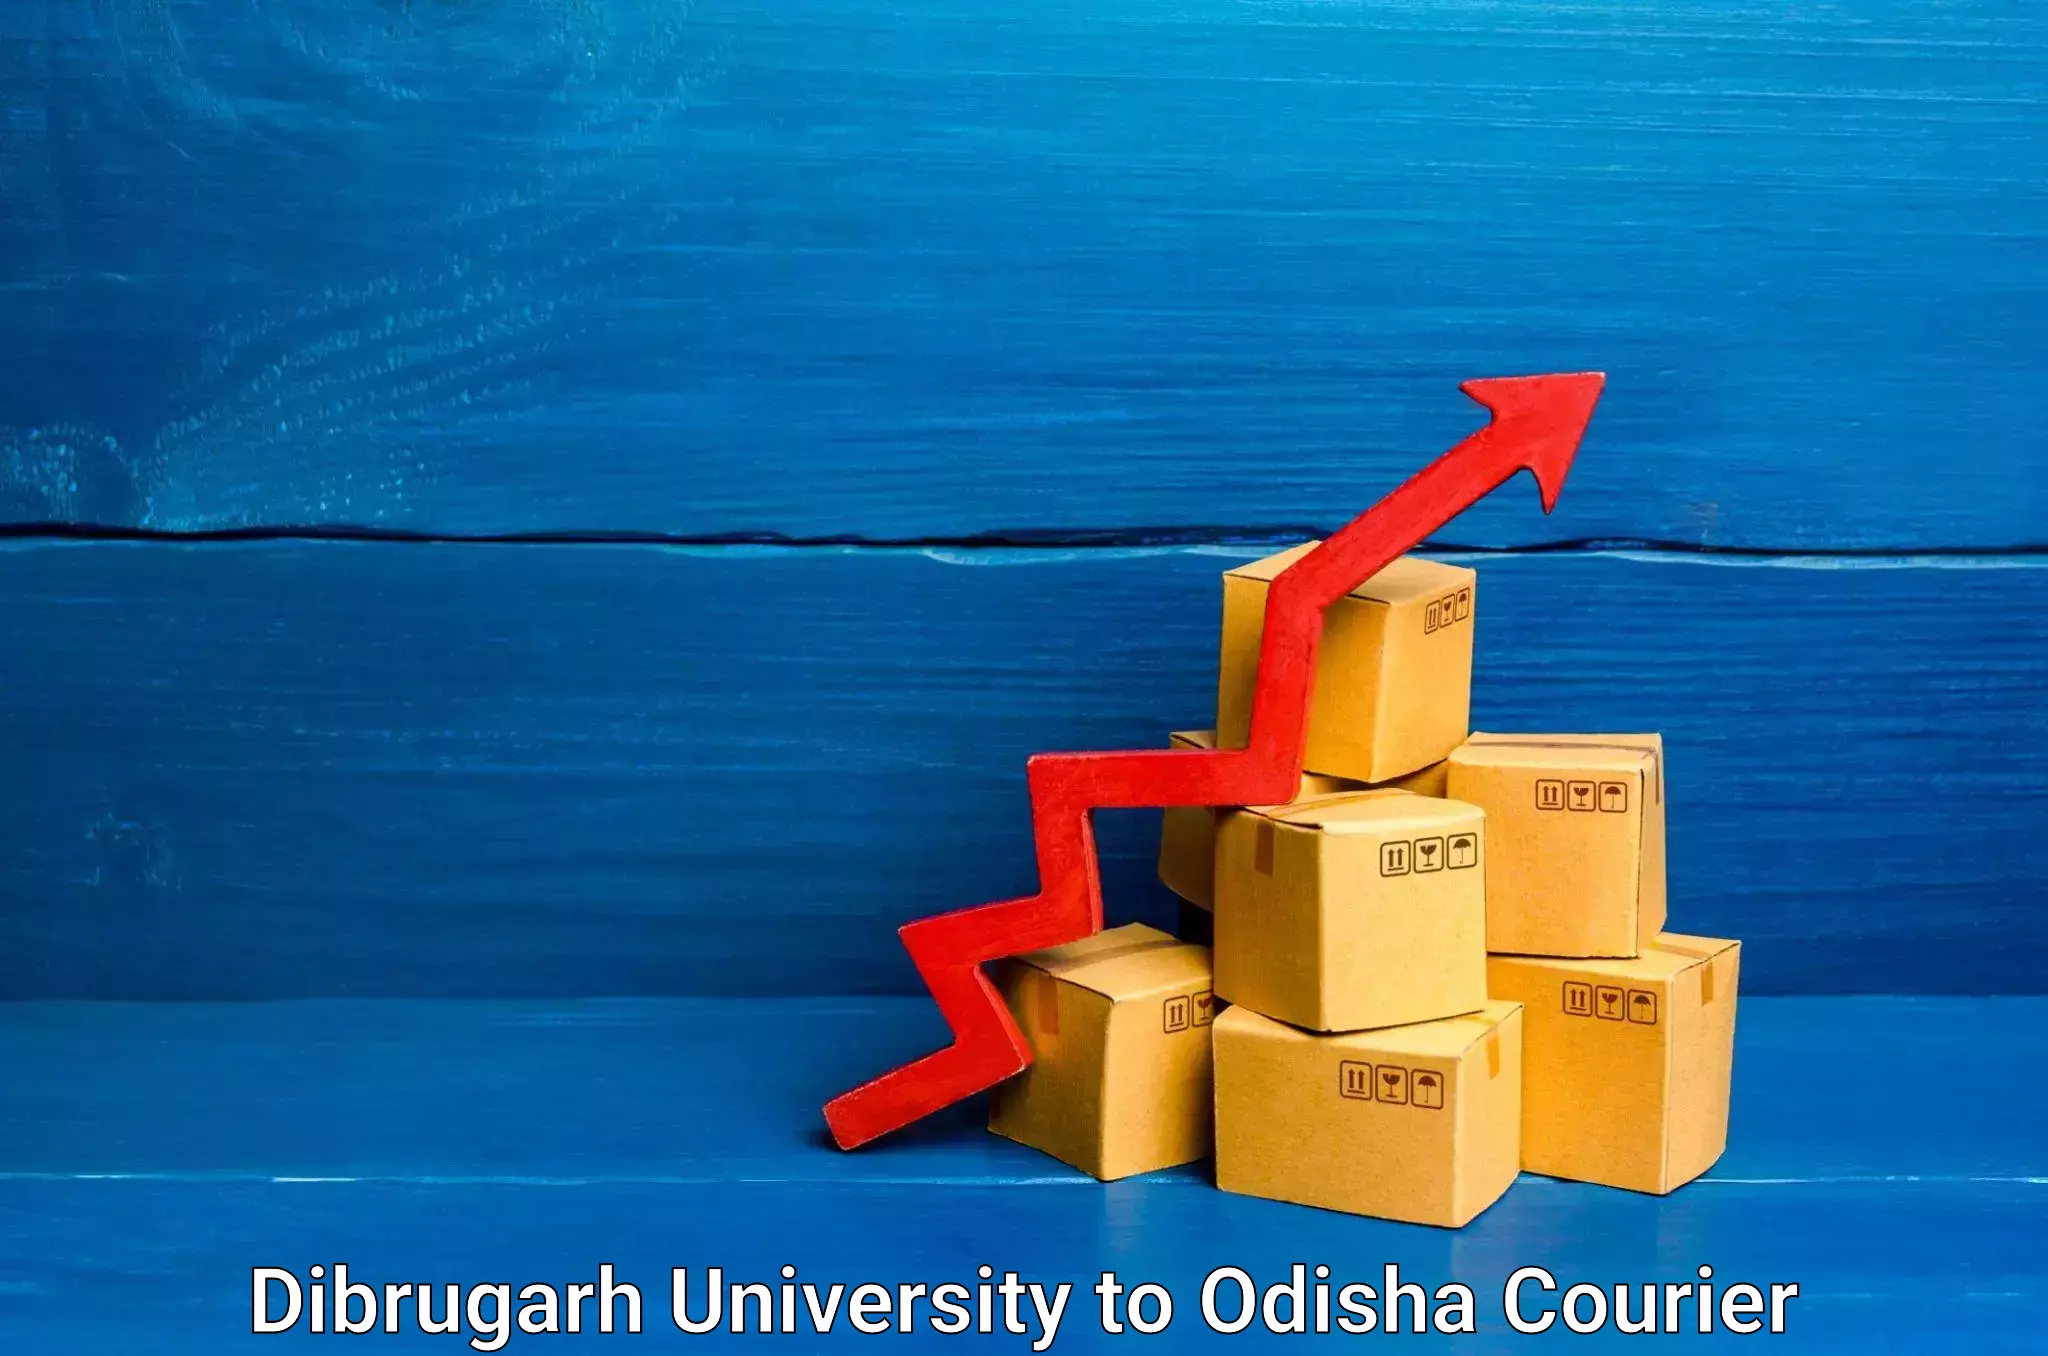 High-speed delivery Dibrugarh University to Khordha